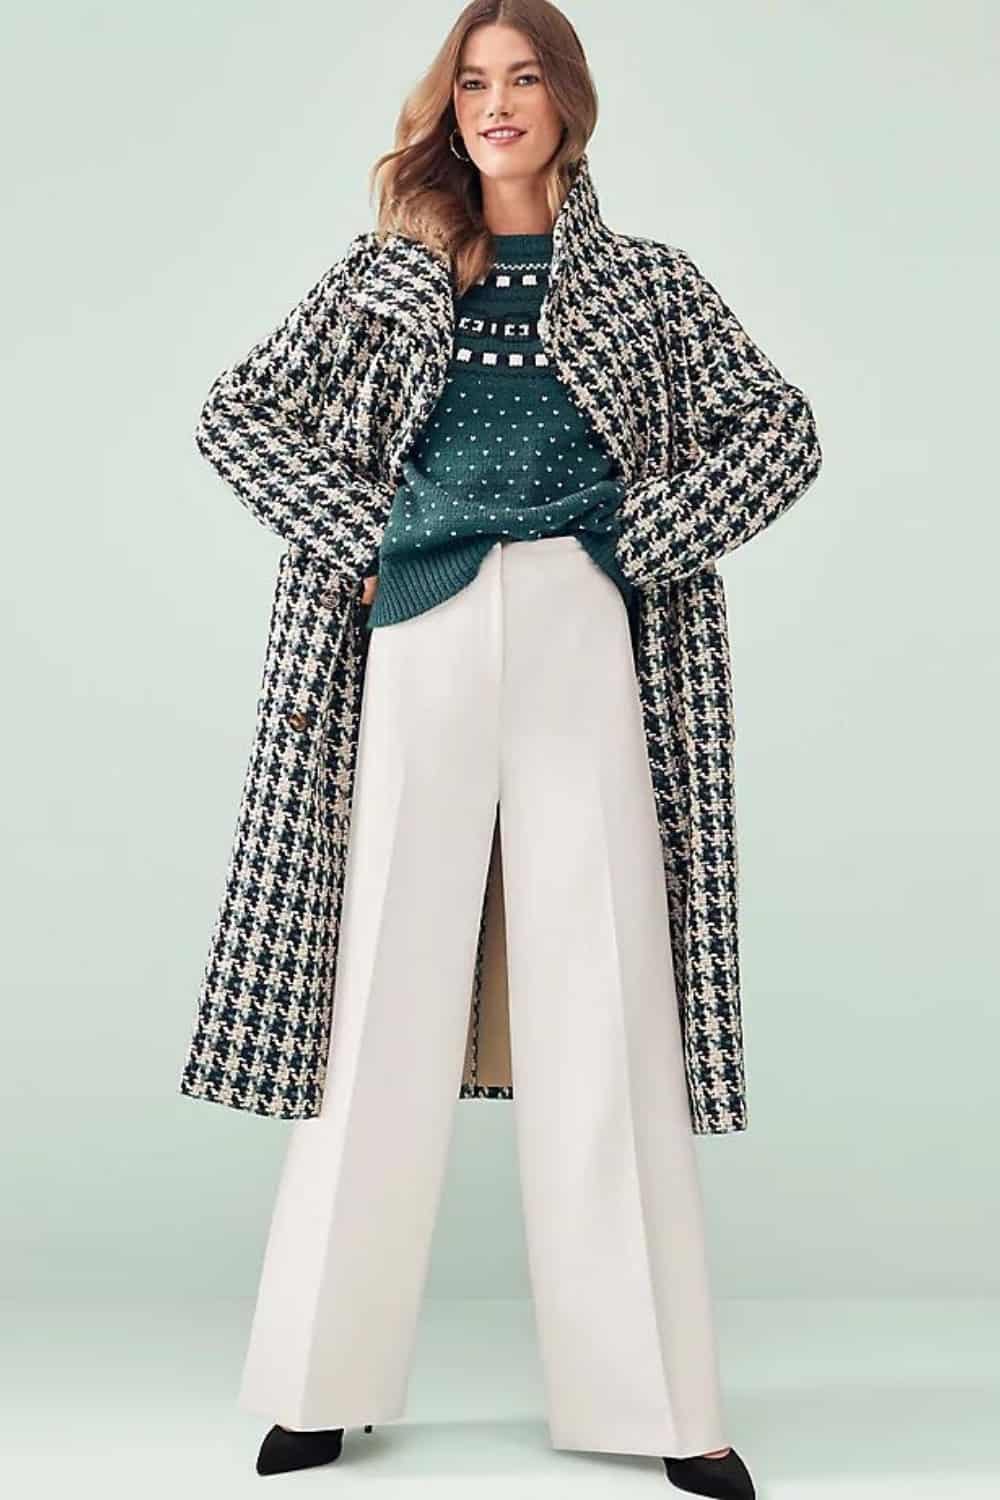 Casual Thanksgiving Outfit Idea - Fair isle sweater wide leg pants